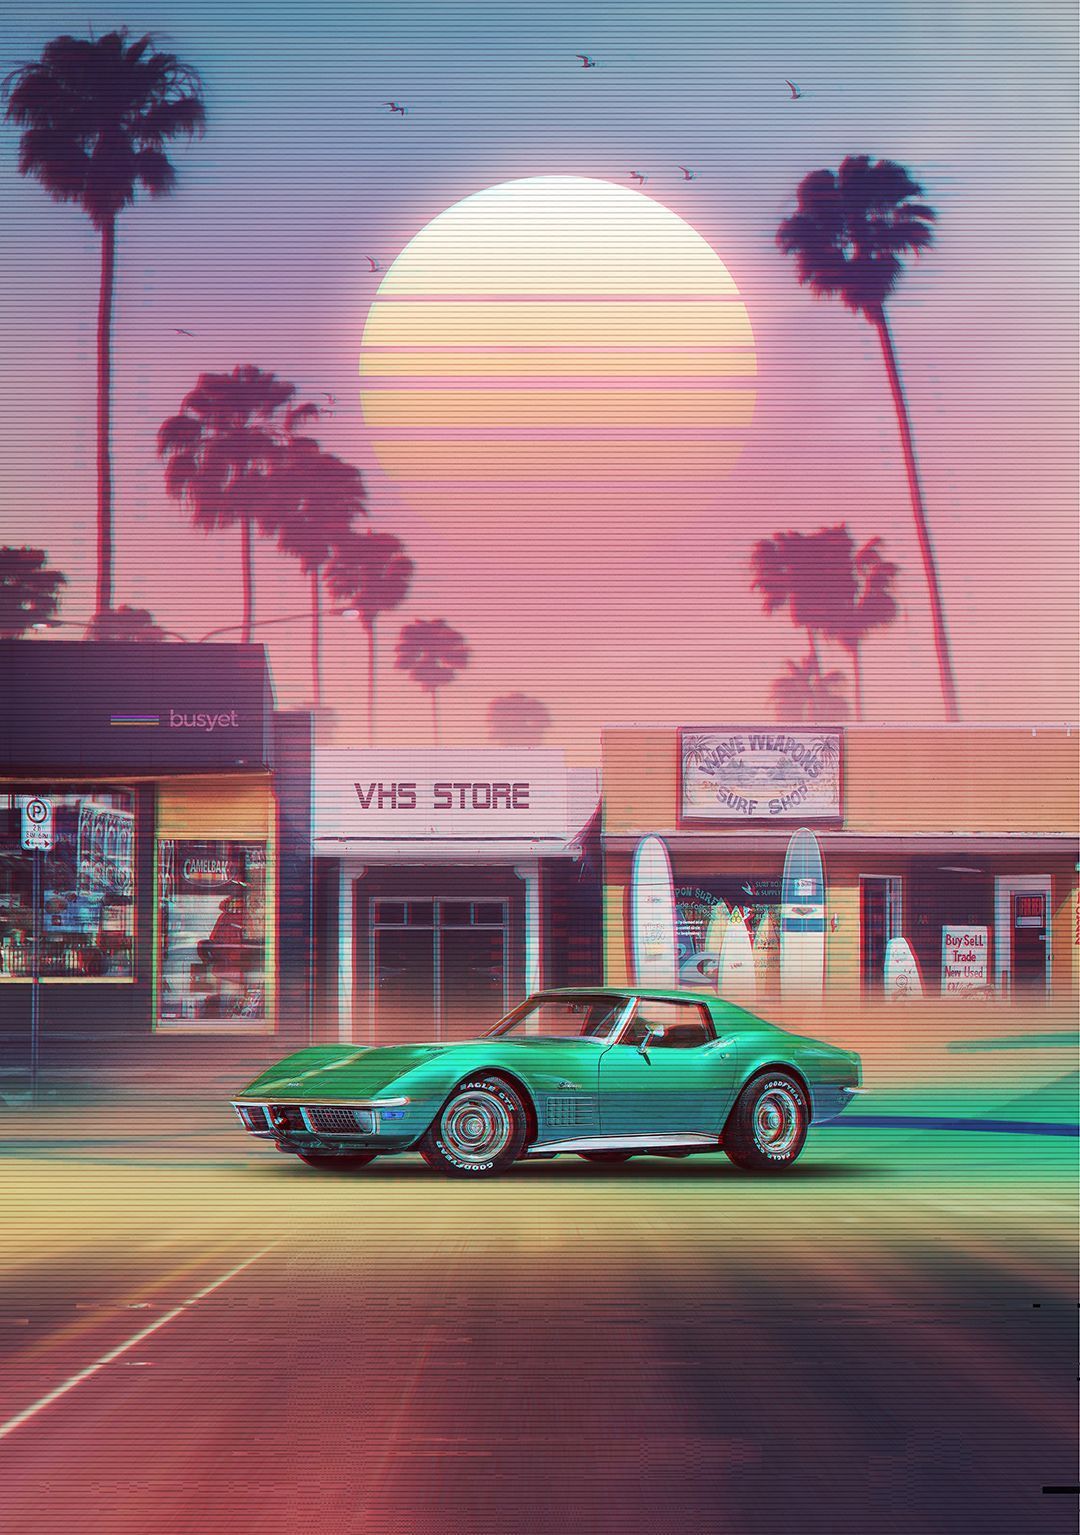 A green car is parked in front of an old store - Vintage, vintage fall, 90s, retro, cars, VHS, 80s